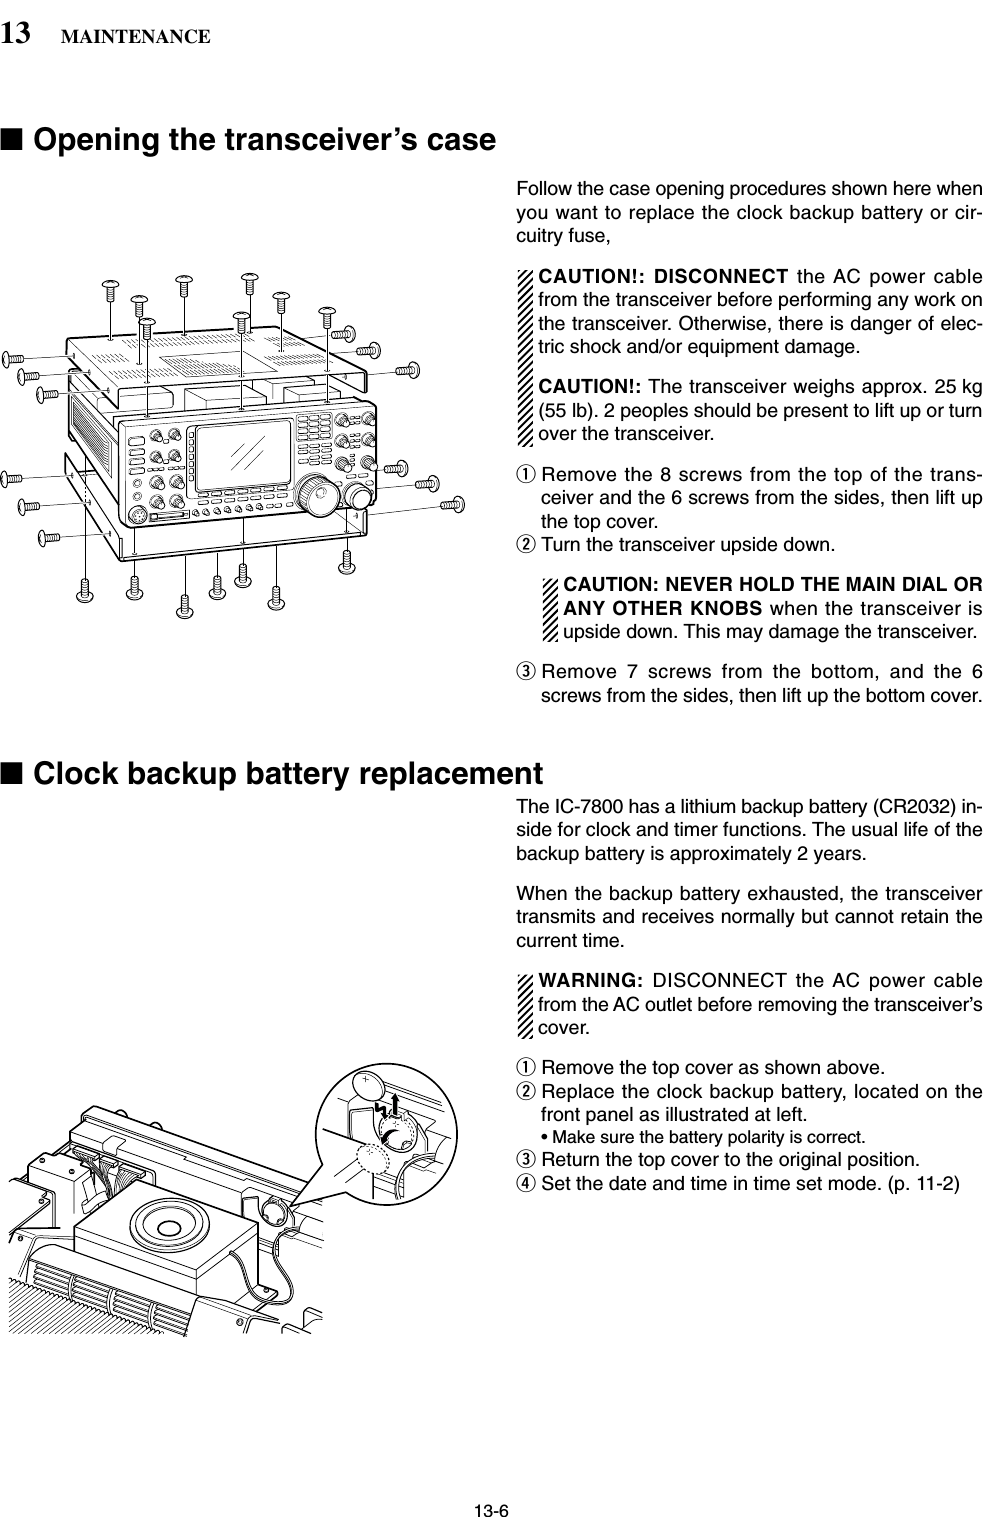 13-6■Opening the transceiver’s caseFollow the case opening procedures shown here whenyou want to replace the clock backup battery or cir-cuitry fuse,CAUTION!: DISCONNECT the AC power cablefrom the transceiver before performing any work onthe transceiver. Otherwise, there is danger of elec-tric shock and/or equipment damage.CAUTION!: The transceiver weighs approx. 25 kg(55 lb). 2 peoples should be present to lift up or turnover the transceiver. qRemove the 8 screws from the top of the trans-ceiver and the 6 screws from the sides, then lift upthe top cover.wTurn the transceiver upside down.CAUTION: NEVER HOLD THE MAIN DIAL ORANY OTHER KNOBS when the transceiver isupside down. This may damage the transceiver.eRemove 7 screws from the bottom, and the 6screws from the sides, then lift up the bottom cover.■Clock backup battery replacementThe IC-7800 has a lithium backup battery (CR2032) in-side for clock and timer functions. The usual life of thebackup battery is approximately 2 years.When the backup battery exhausted, the transceivertransmits and receives normally but cannot retain thecurrent time.WARNING:  DISCONNECT the AC power cablefrom the AC outlet before removing the transceiver’scover.qRemove the top cover as shown above.wReplace the clock backup battery, located on thefront panel as illustrated at left.• Make sure the battery polarity is correct.eReturn the top cover to the original position.rSet the date and time in time set mode. (p. 11-2)13 MAINTENANCE